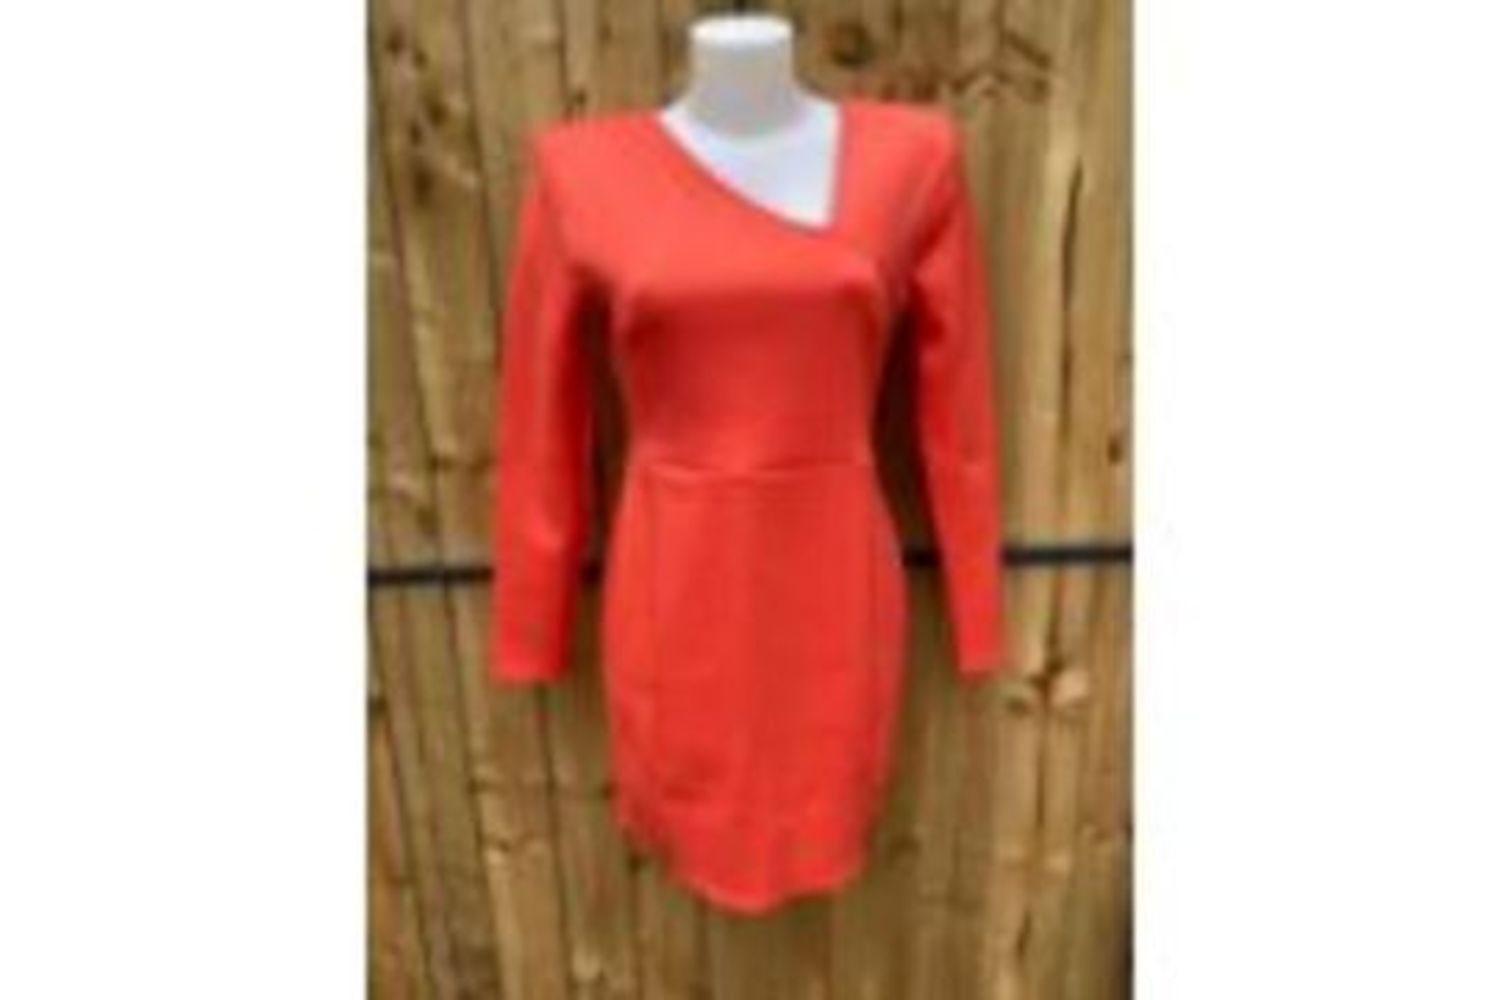 Trade Lot of Asos Stocked Clothing Items Such As: Suits, Swimwear, Dresses & More - Sold in Trade Lot!